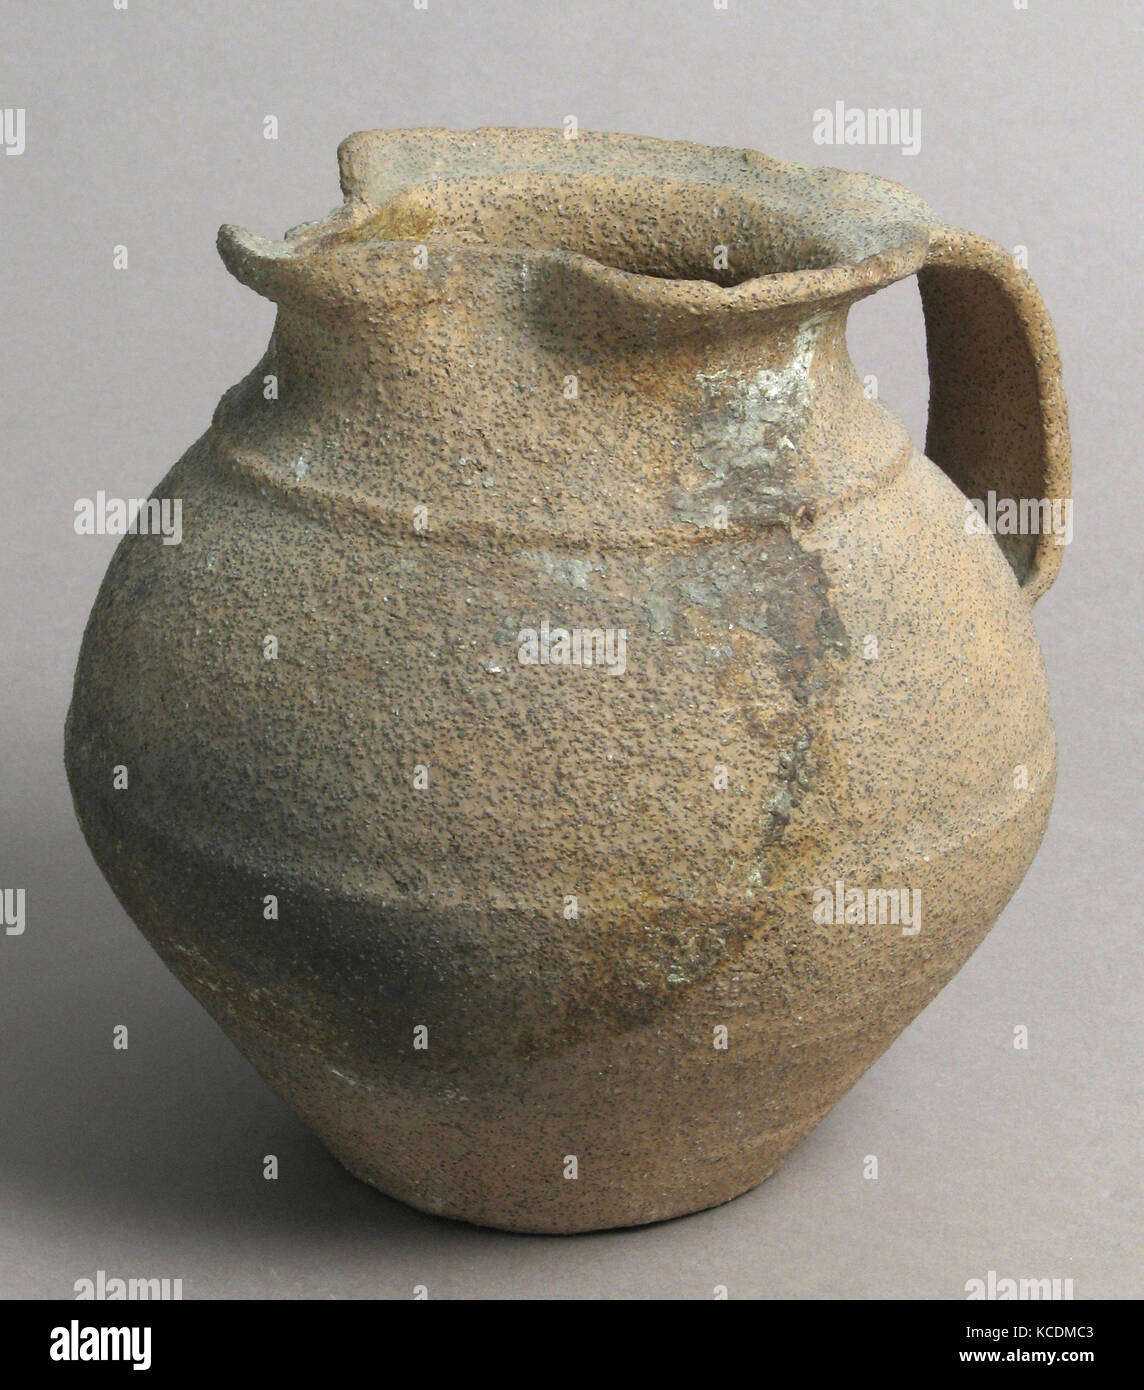 Jug, 16th century, French, Earthenware, Overall: 6 1/2 x 6 5/8 x 6 5/16 in. (16.5 x 16.9 x 16 cm), Ceramics Stock Photo